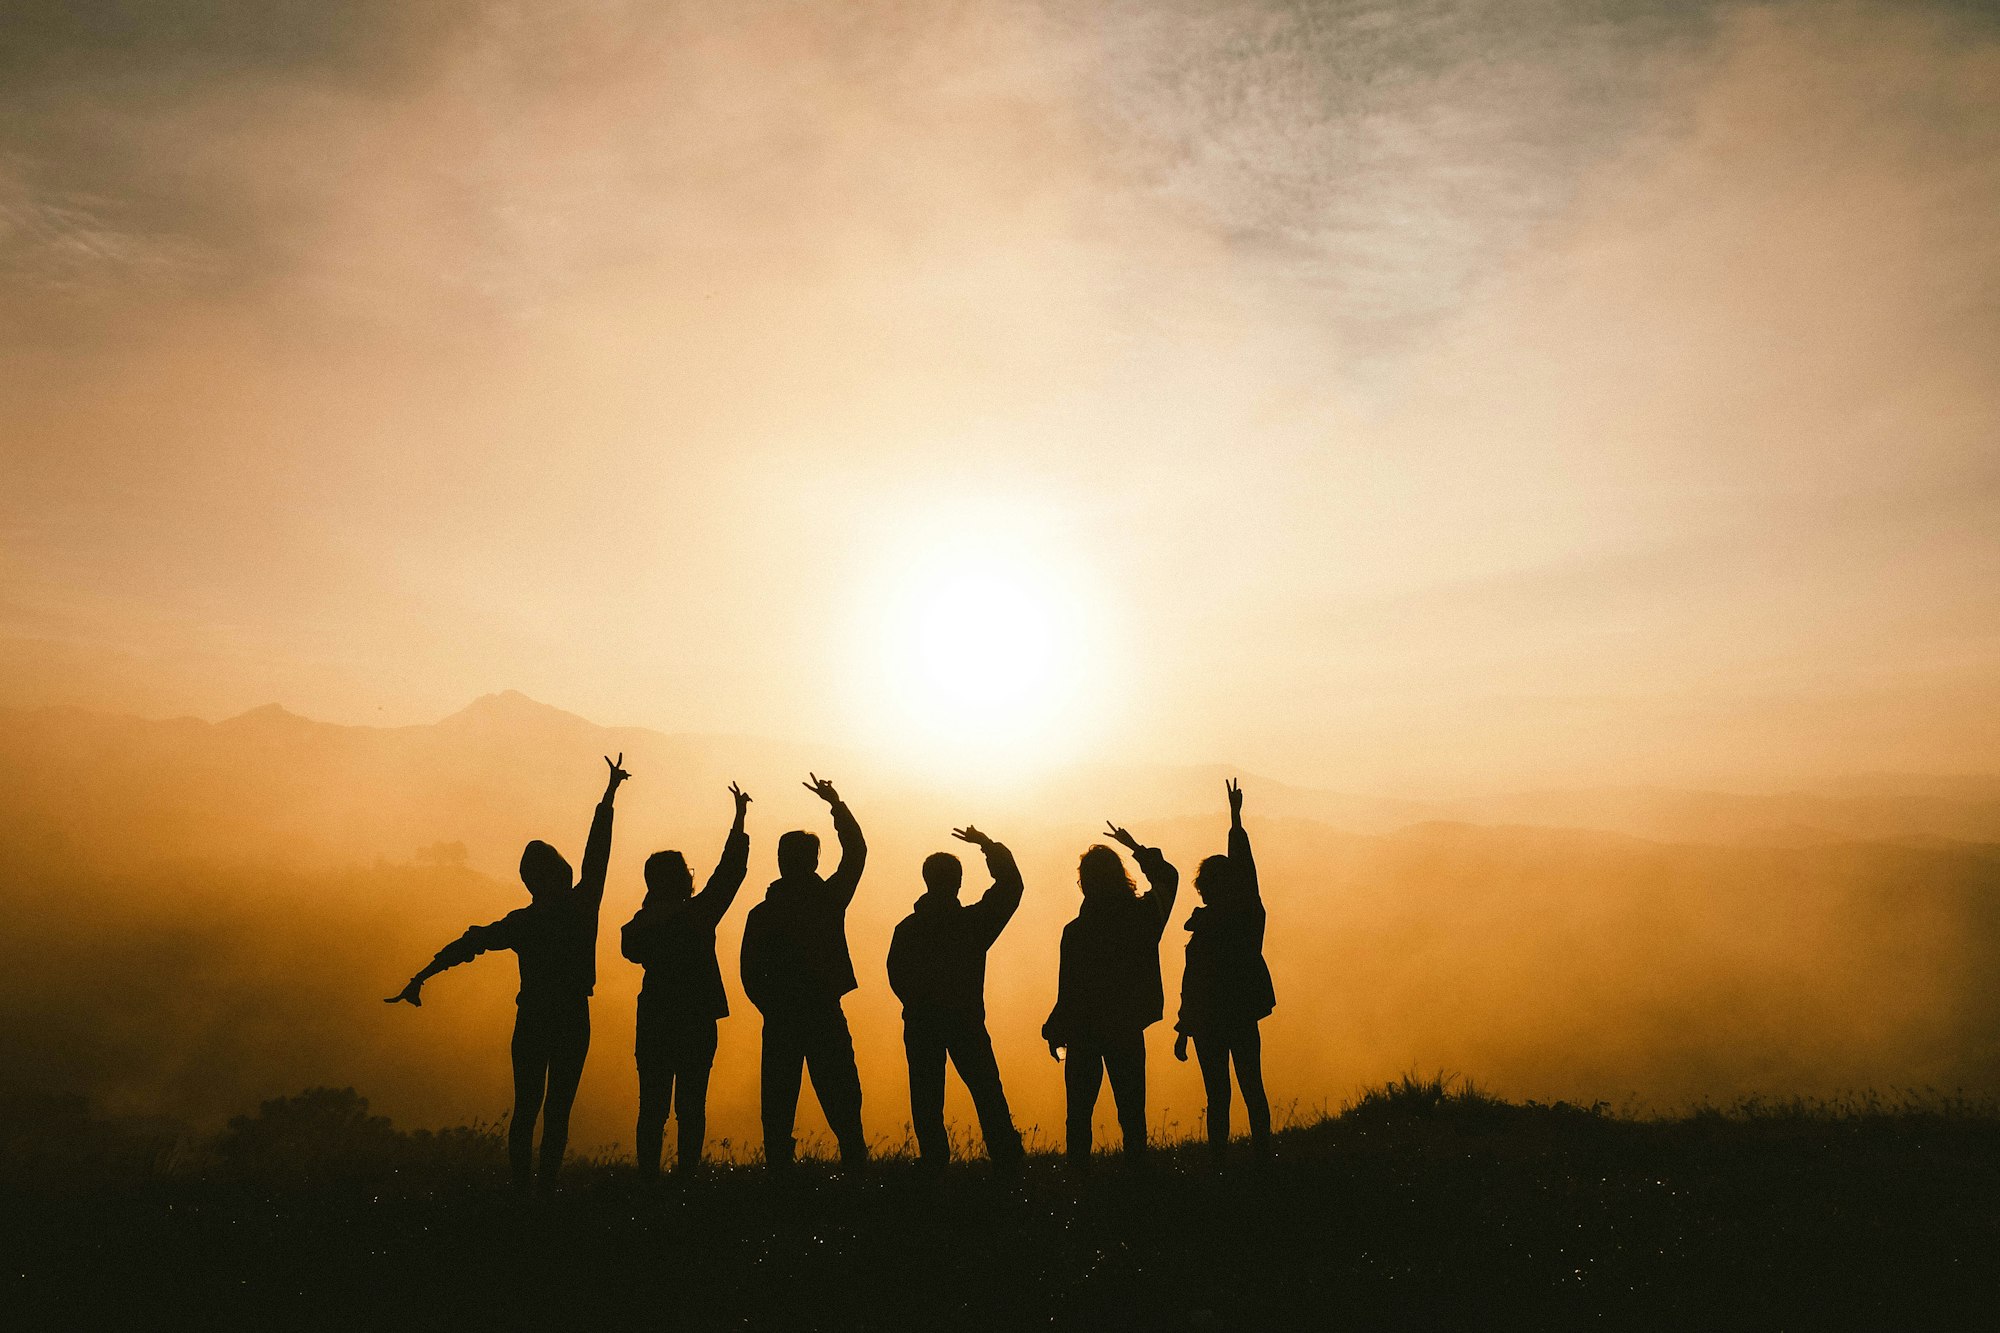 Silhouette of six best friends cheerfully posing with a peace hand sign towards the setting sun.